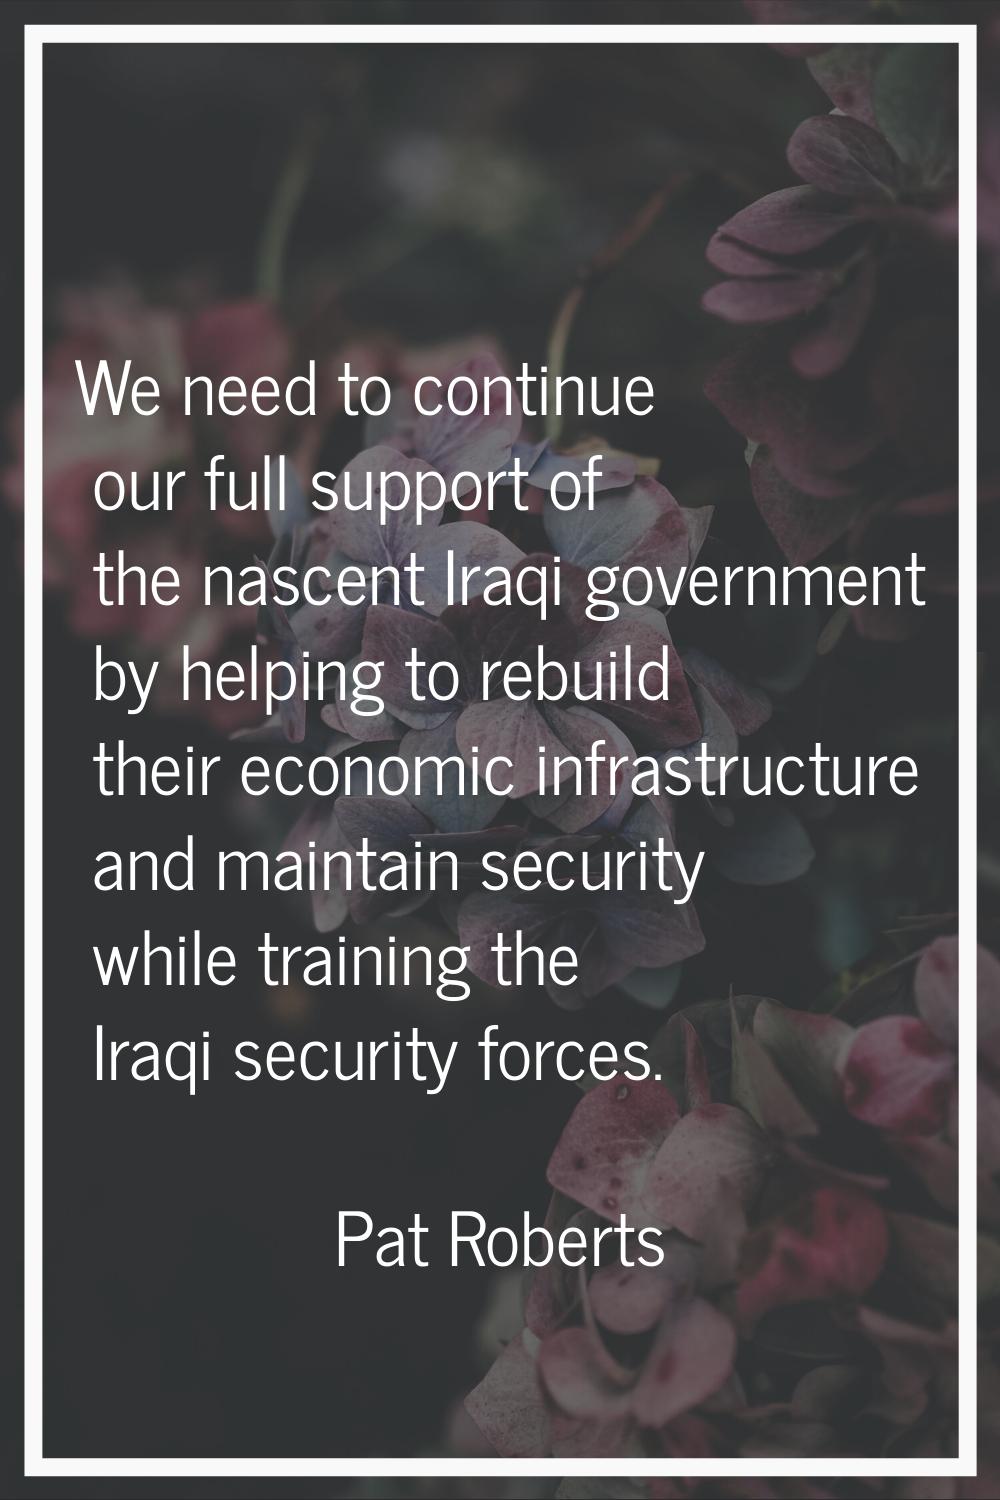 We need to continue our full support of the nascent Iraqi government by helping to rebuild their ec